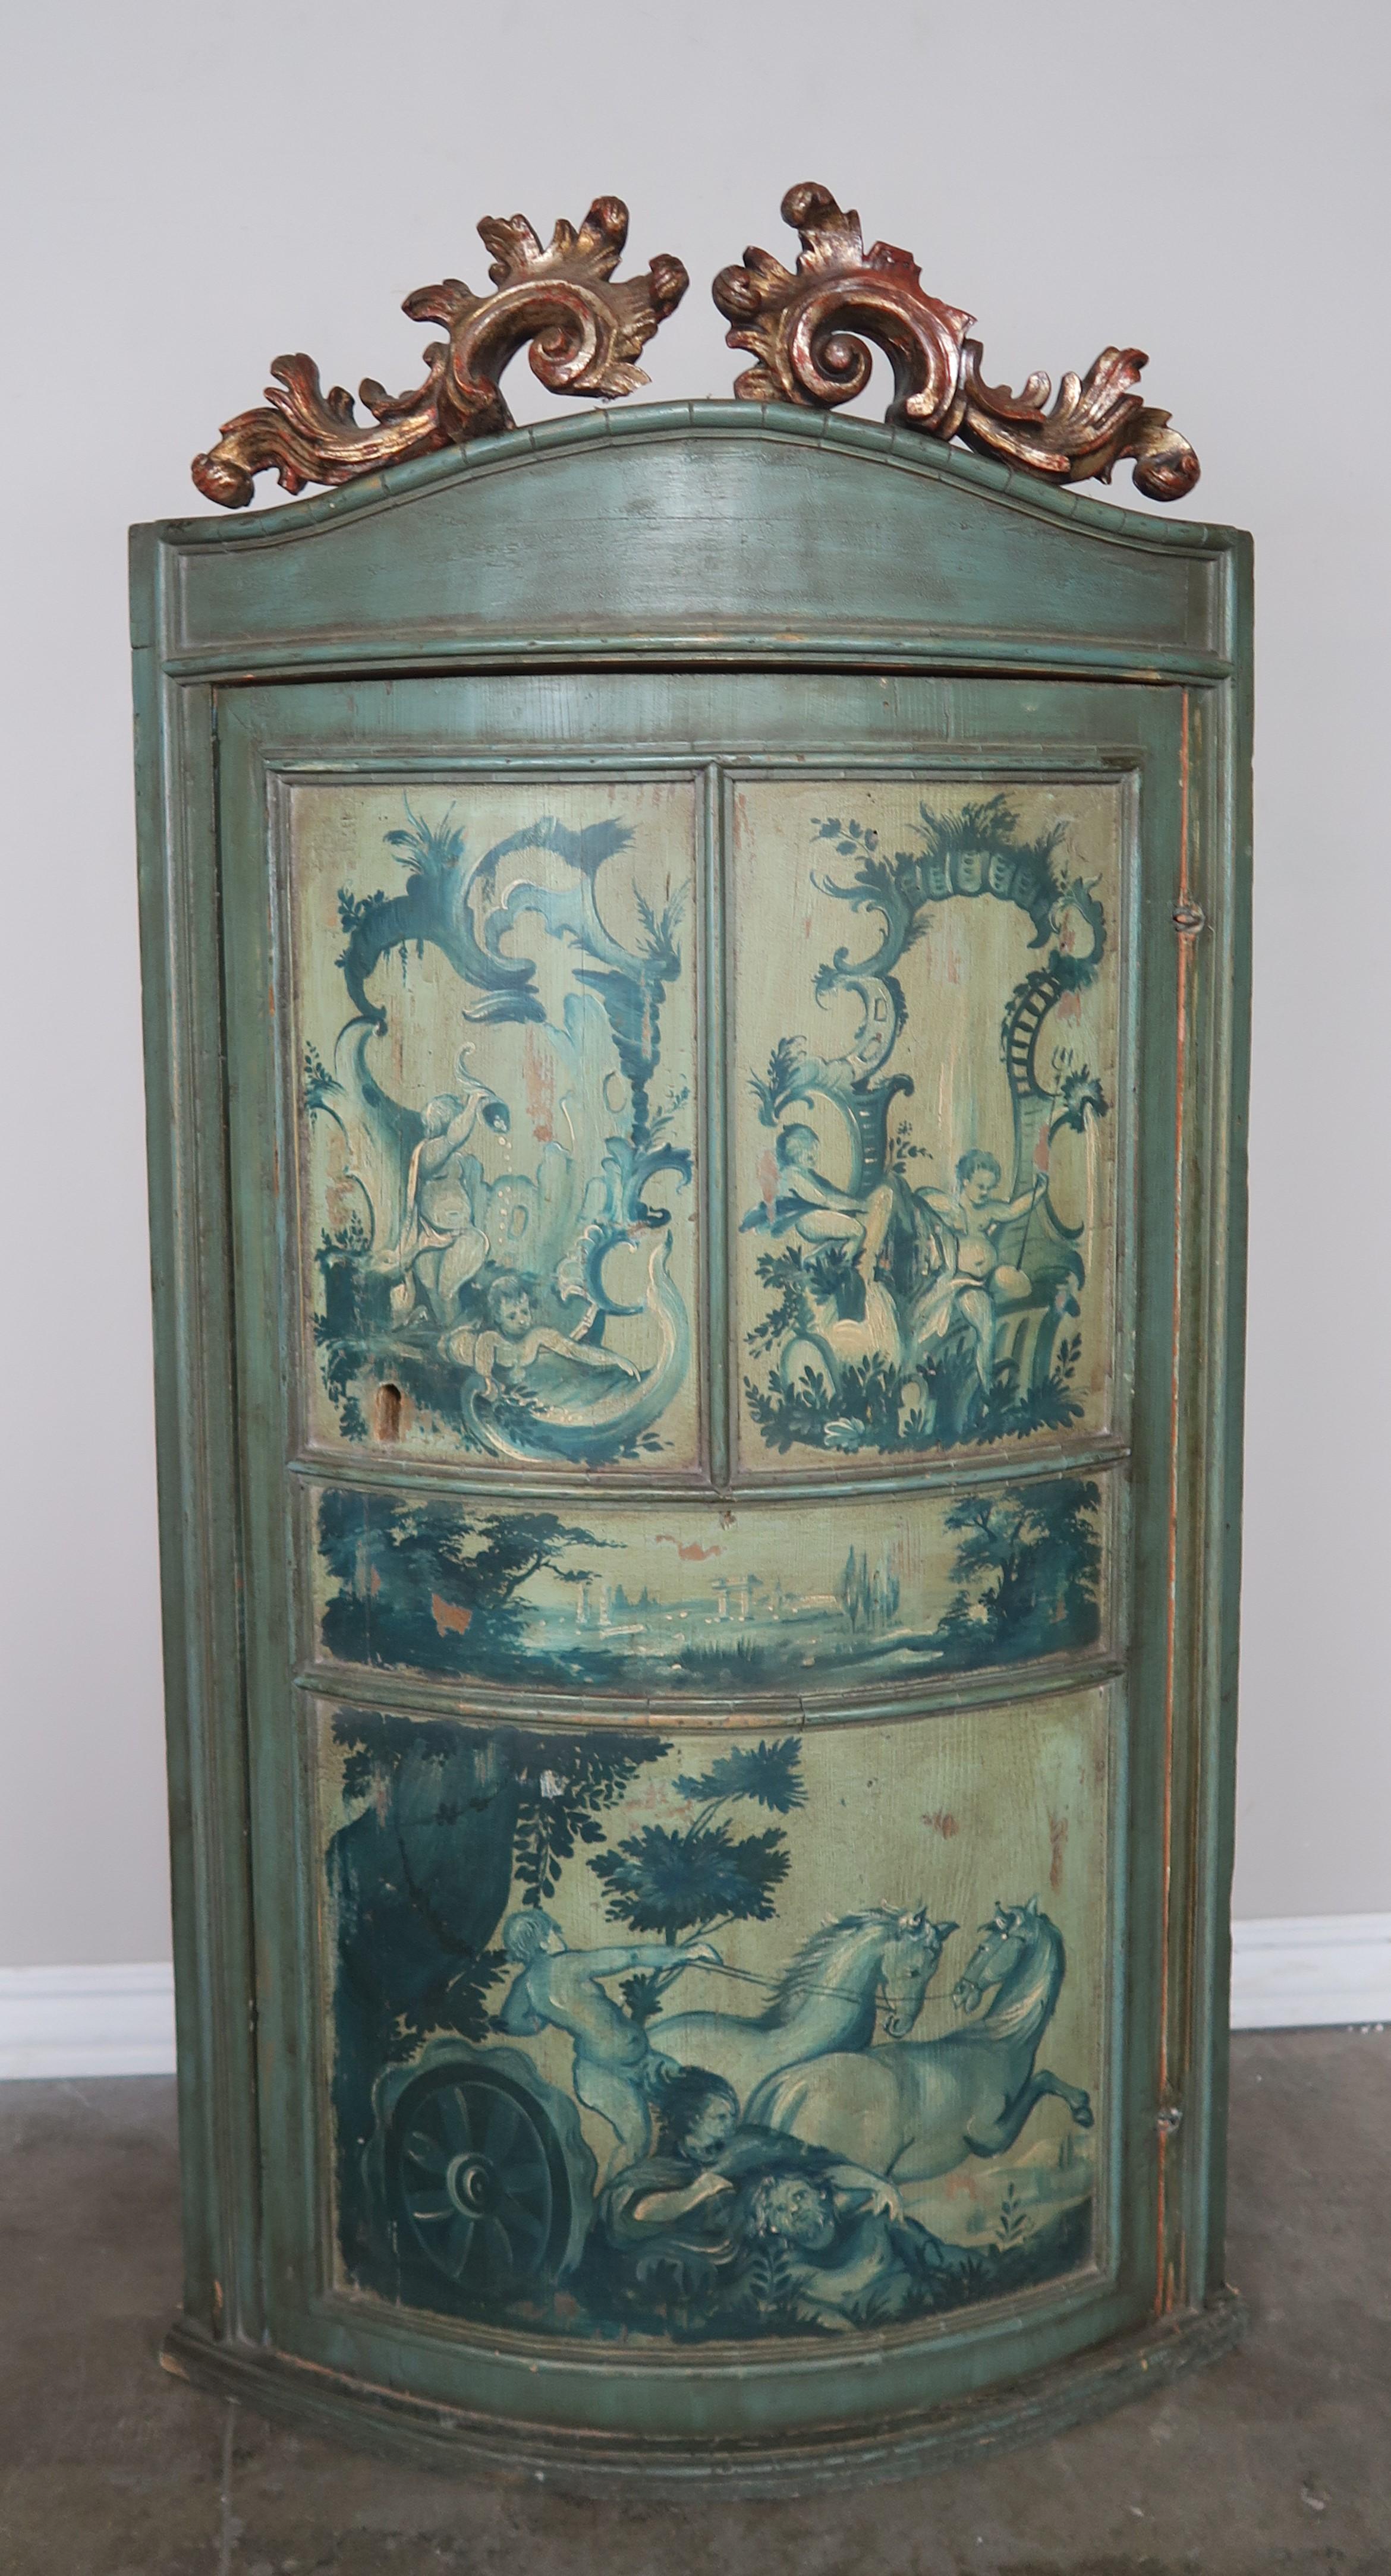 1930s Italian painted and parcel gilt corner cabinet. The piece is finely painted with cherubs and mythological scenes in soft shades of green and aqua blue. The top is also finely carved and finished in 22-karat gold leaf. Original working key